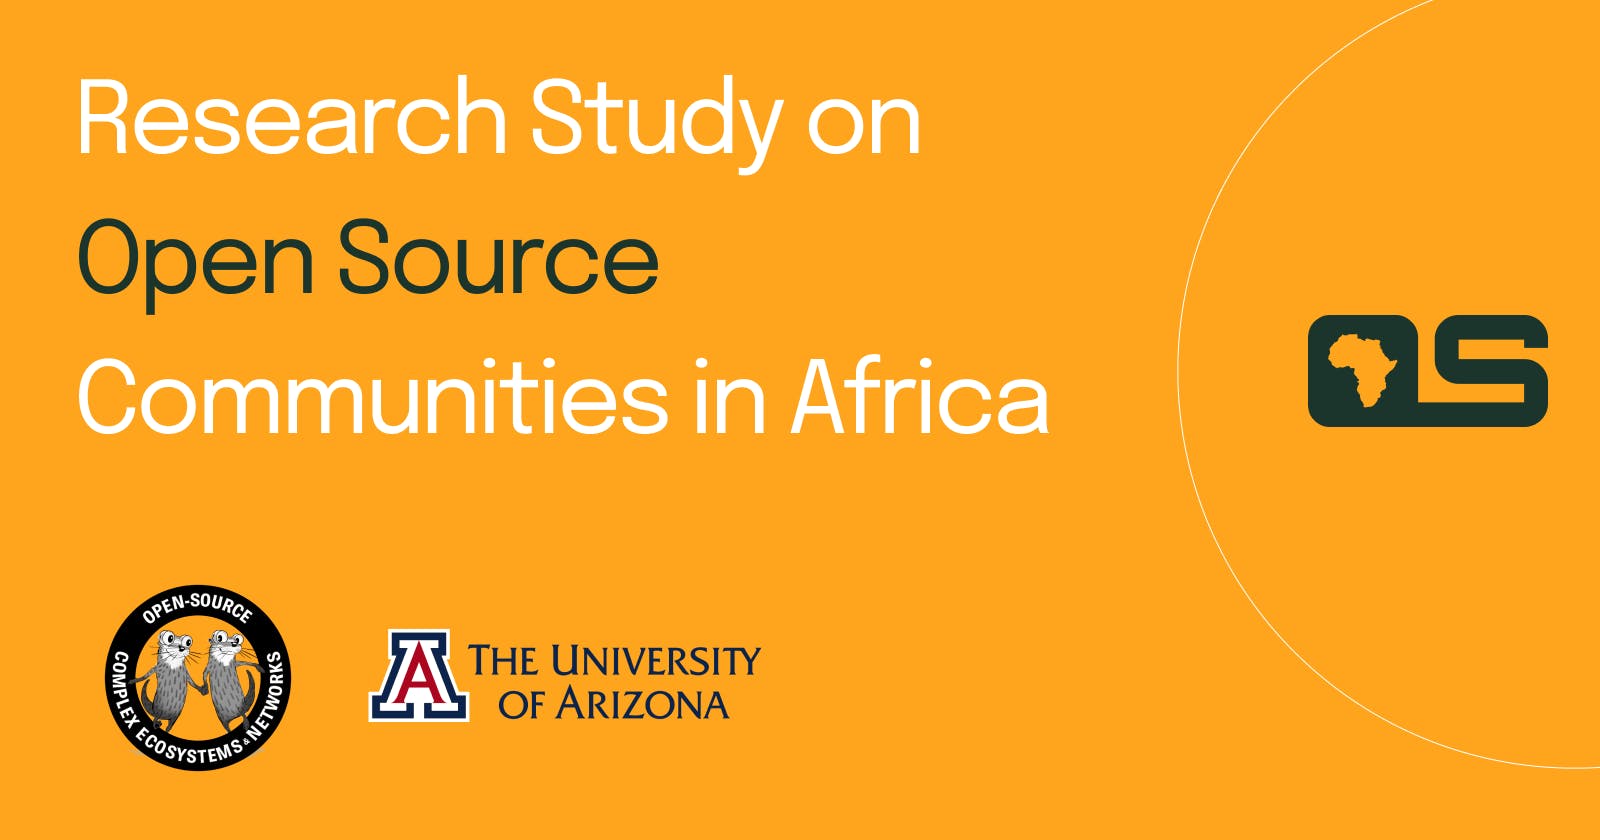 Research Study on Open Source Communities in Africa